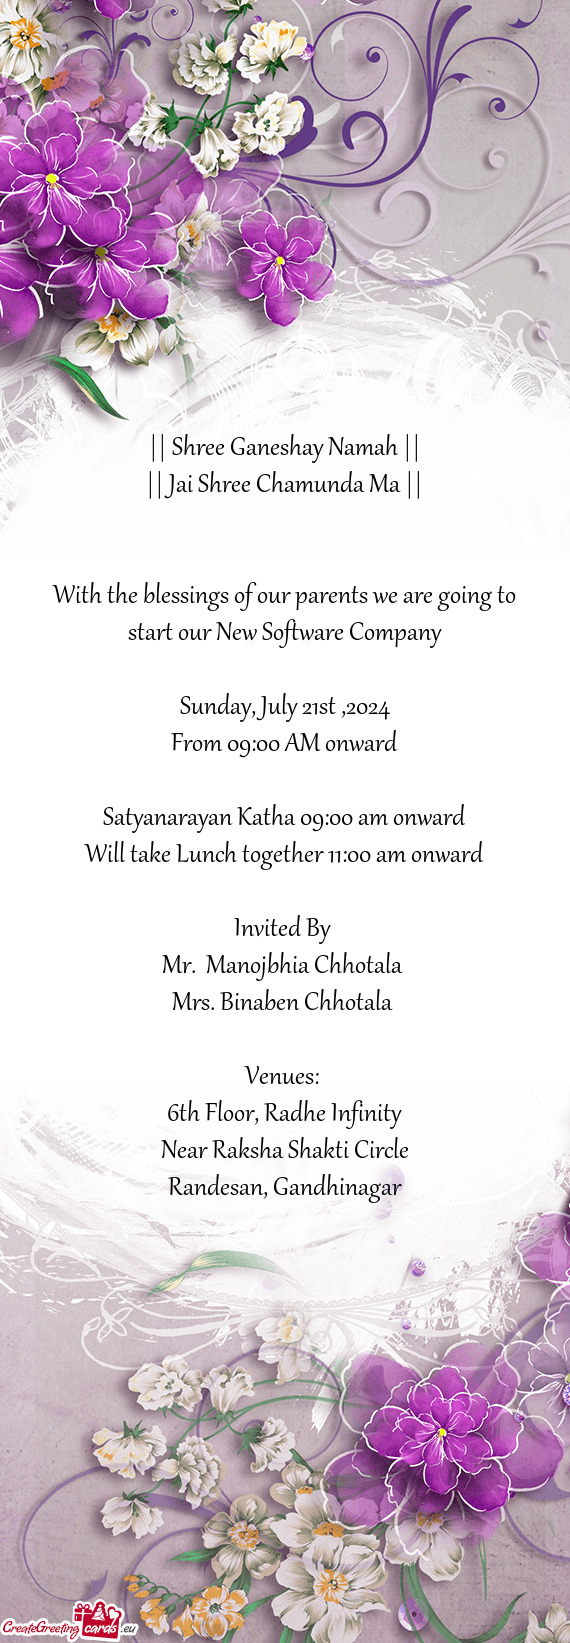 With the blessings of our parents we are going to start our New Software Company